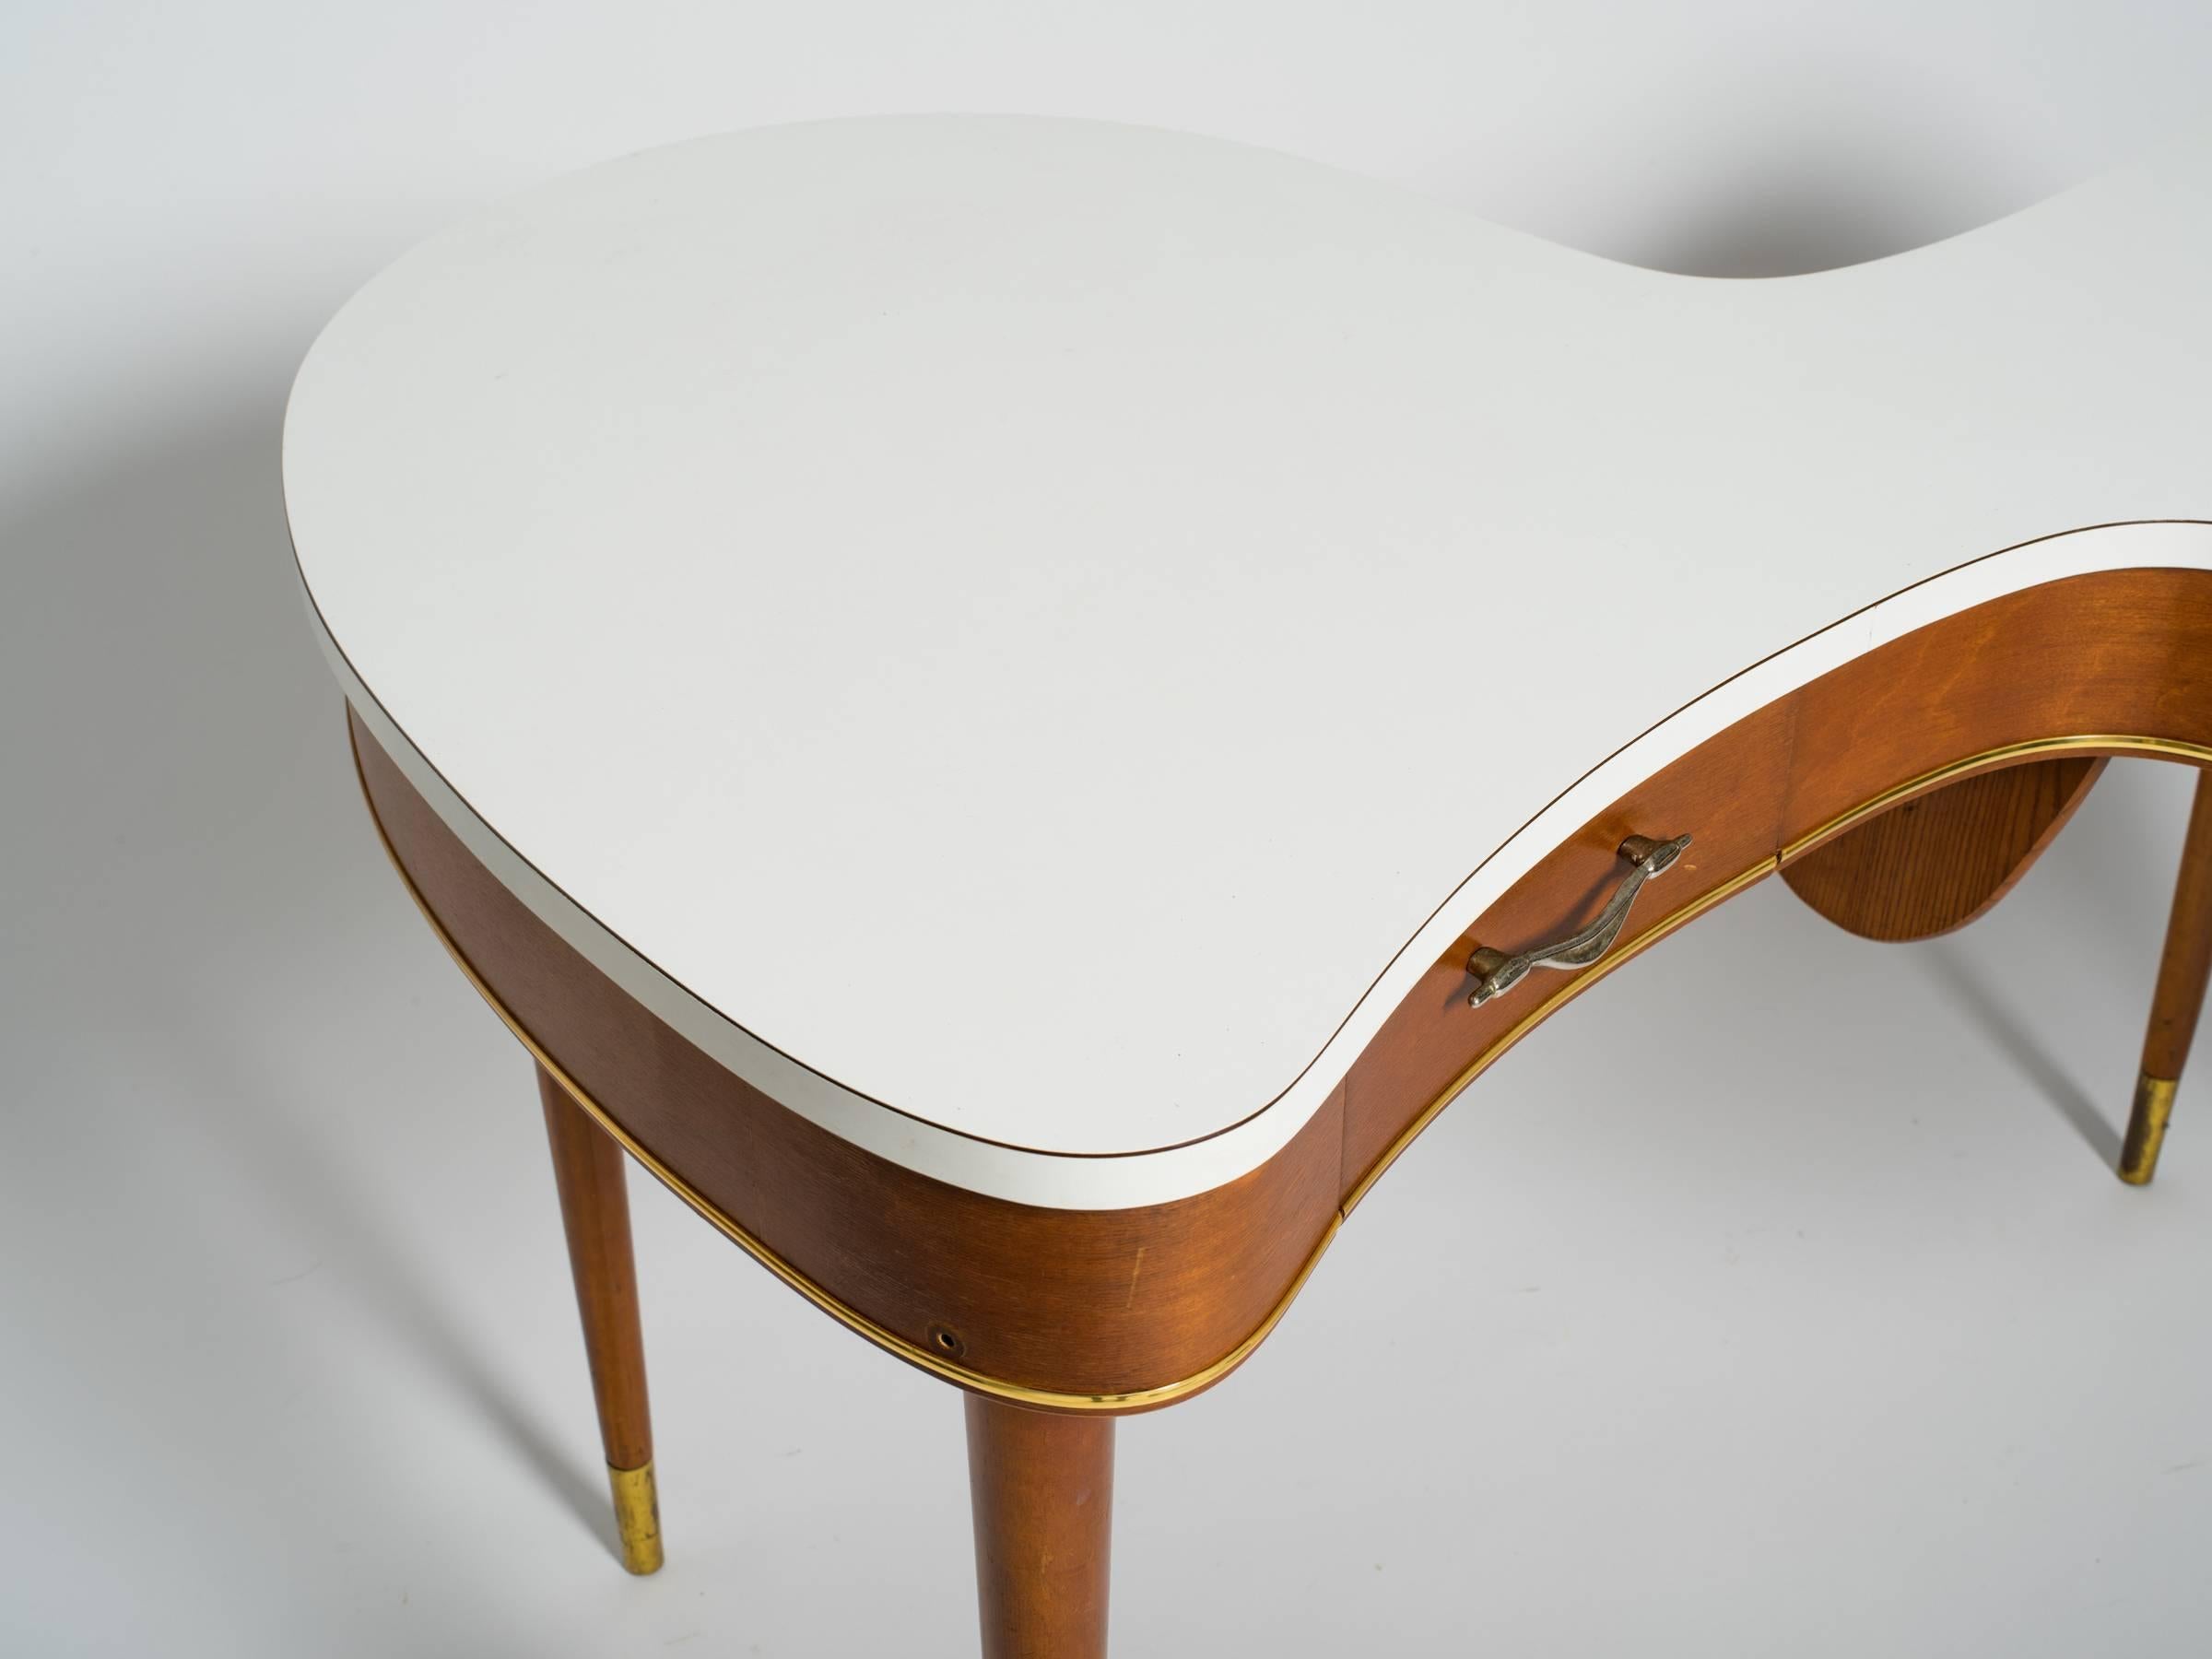 1940s organic shaped two-drawer desk with Formica top.